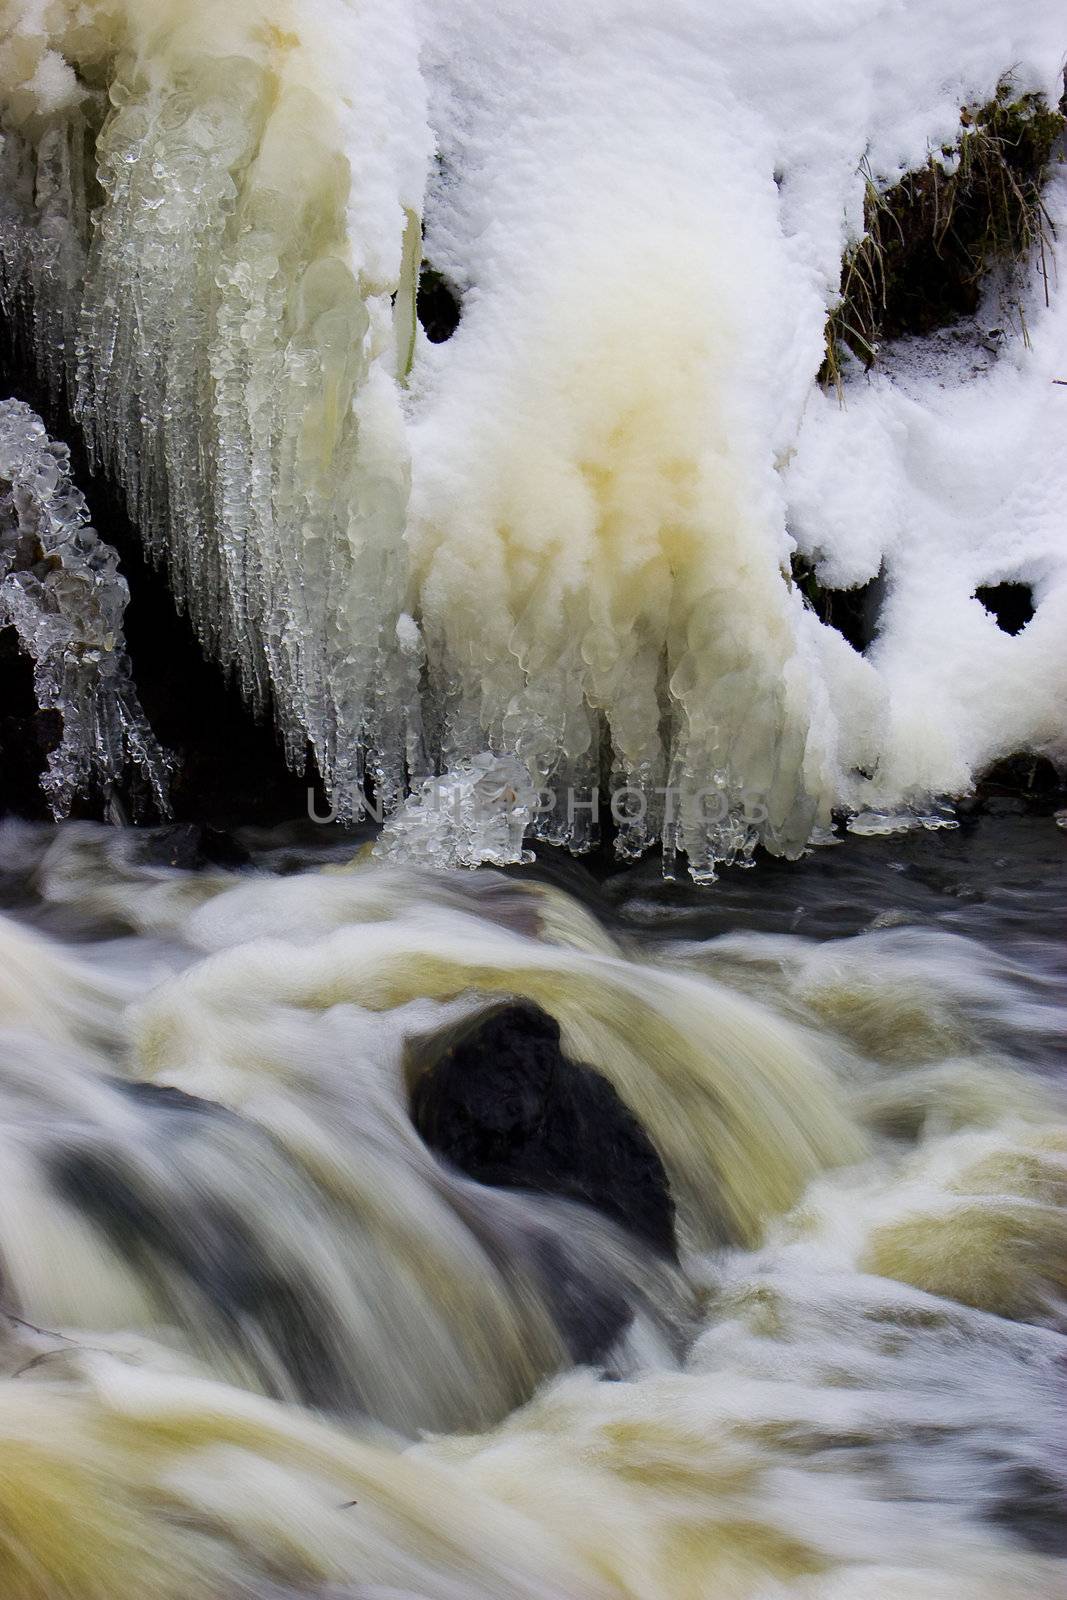 Frozen Waterfall with icicles in cold winter day